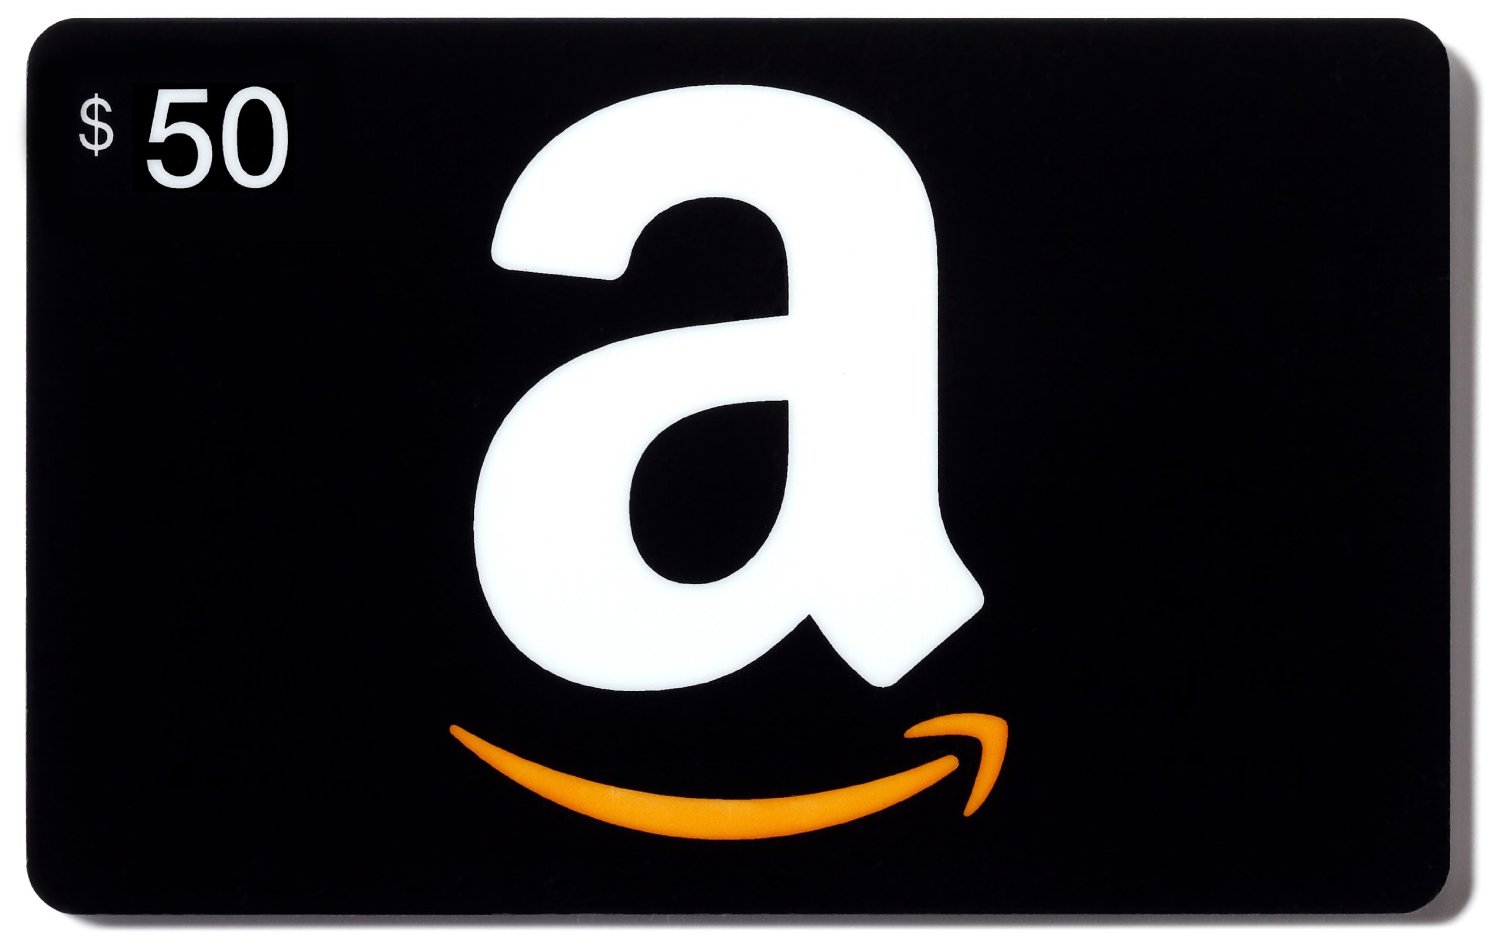 *HOT* Free 10 Credit With 50 Amazon Gift Card Purchase